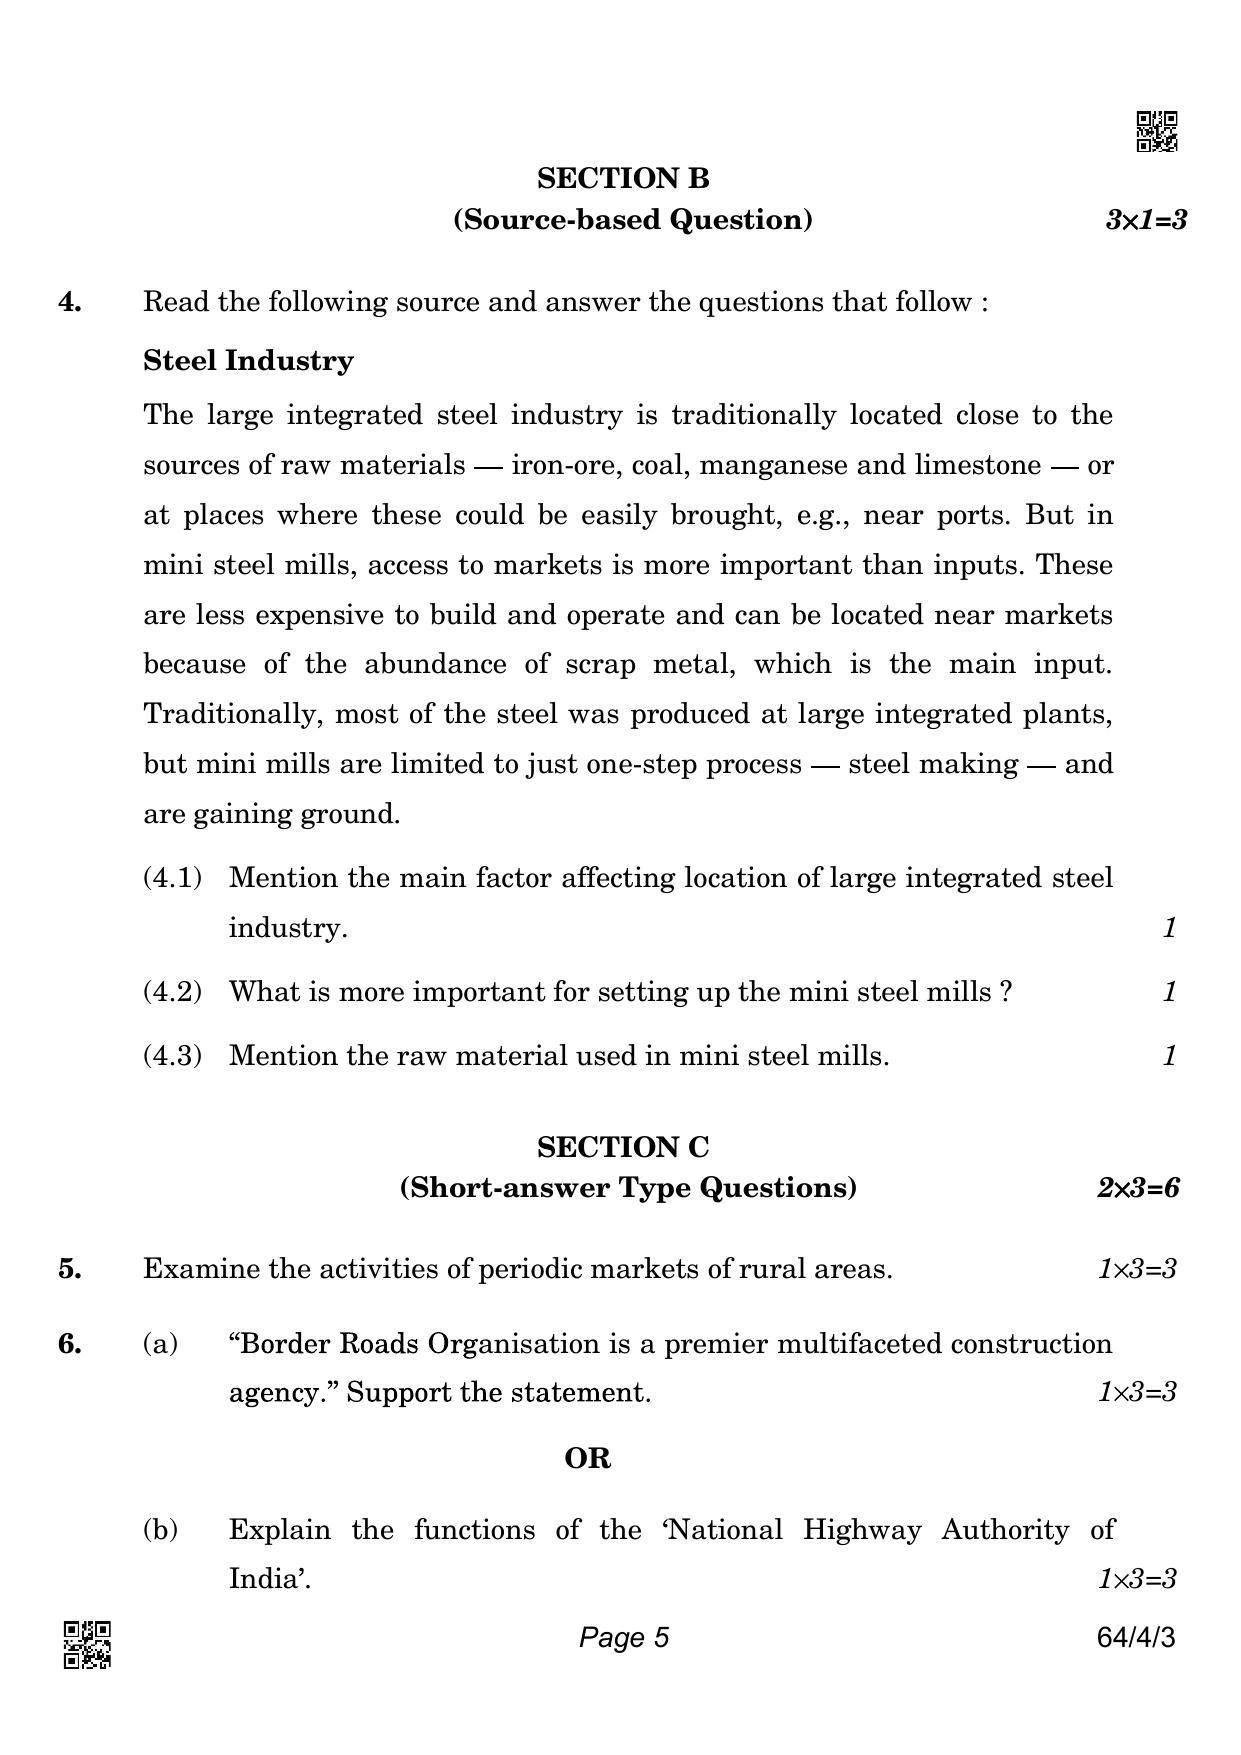 CBSE Class 12 64-4-3 Geography 2022 Question Paper - Page 5